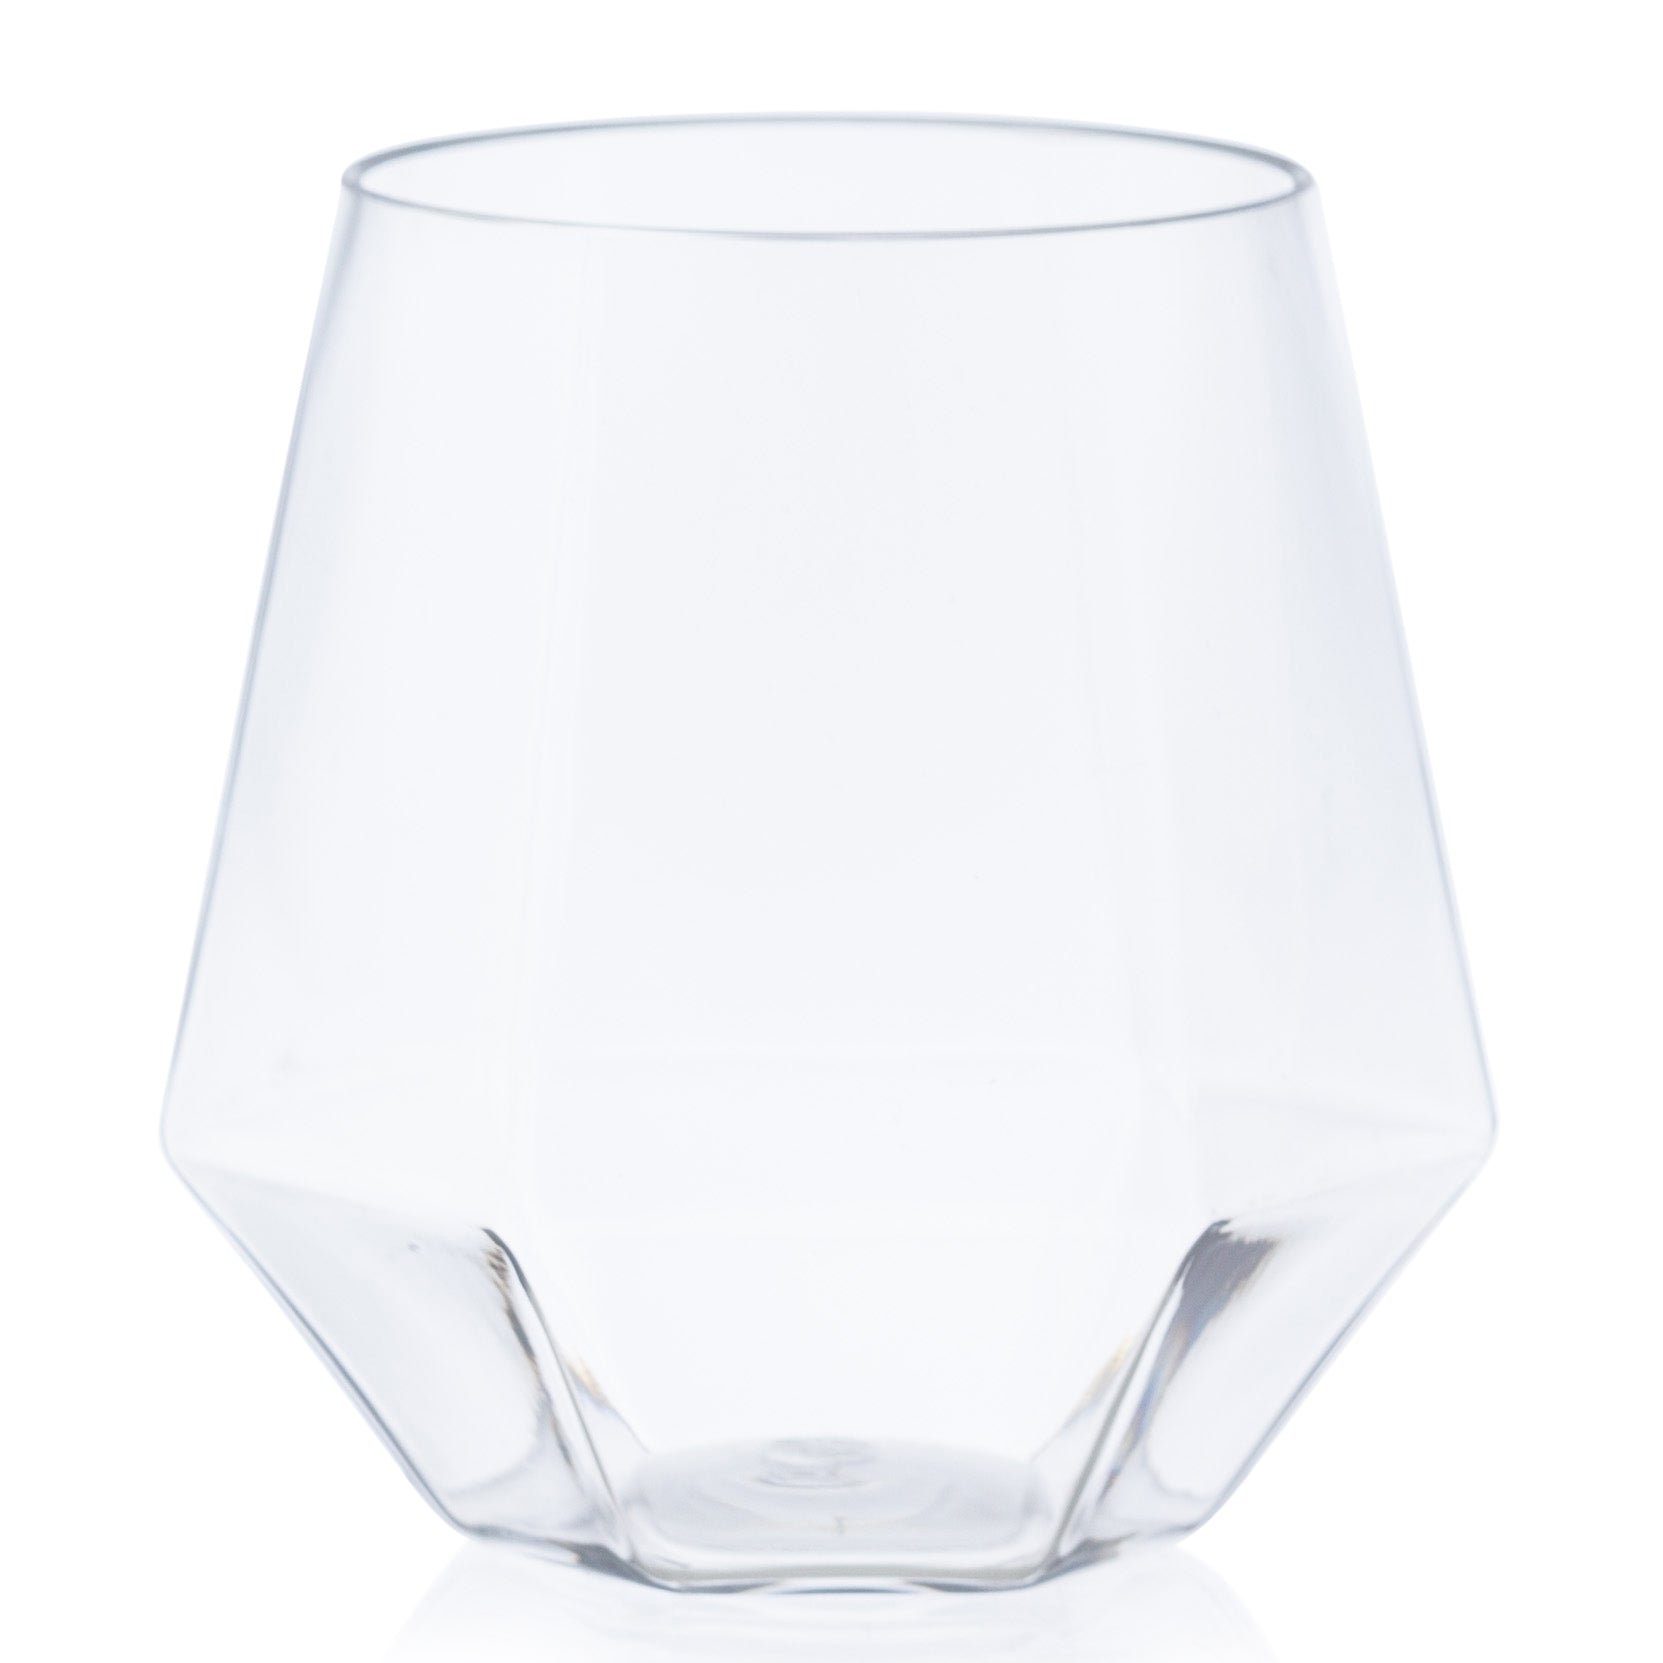 HomeyGear 6 Pack Plastic Diamond Shaped Wine Glasses BPA Free Clear Goblets Stemless 12 oz Disposable Elegant Drink Cups for Parties Wedding